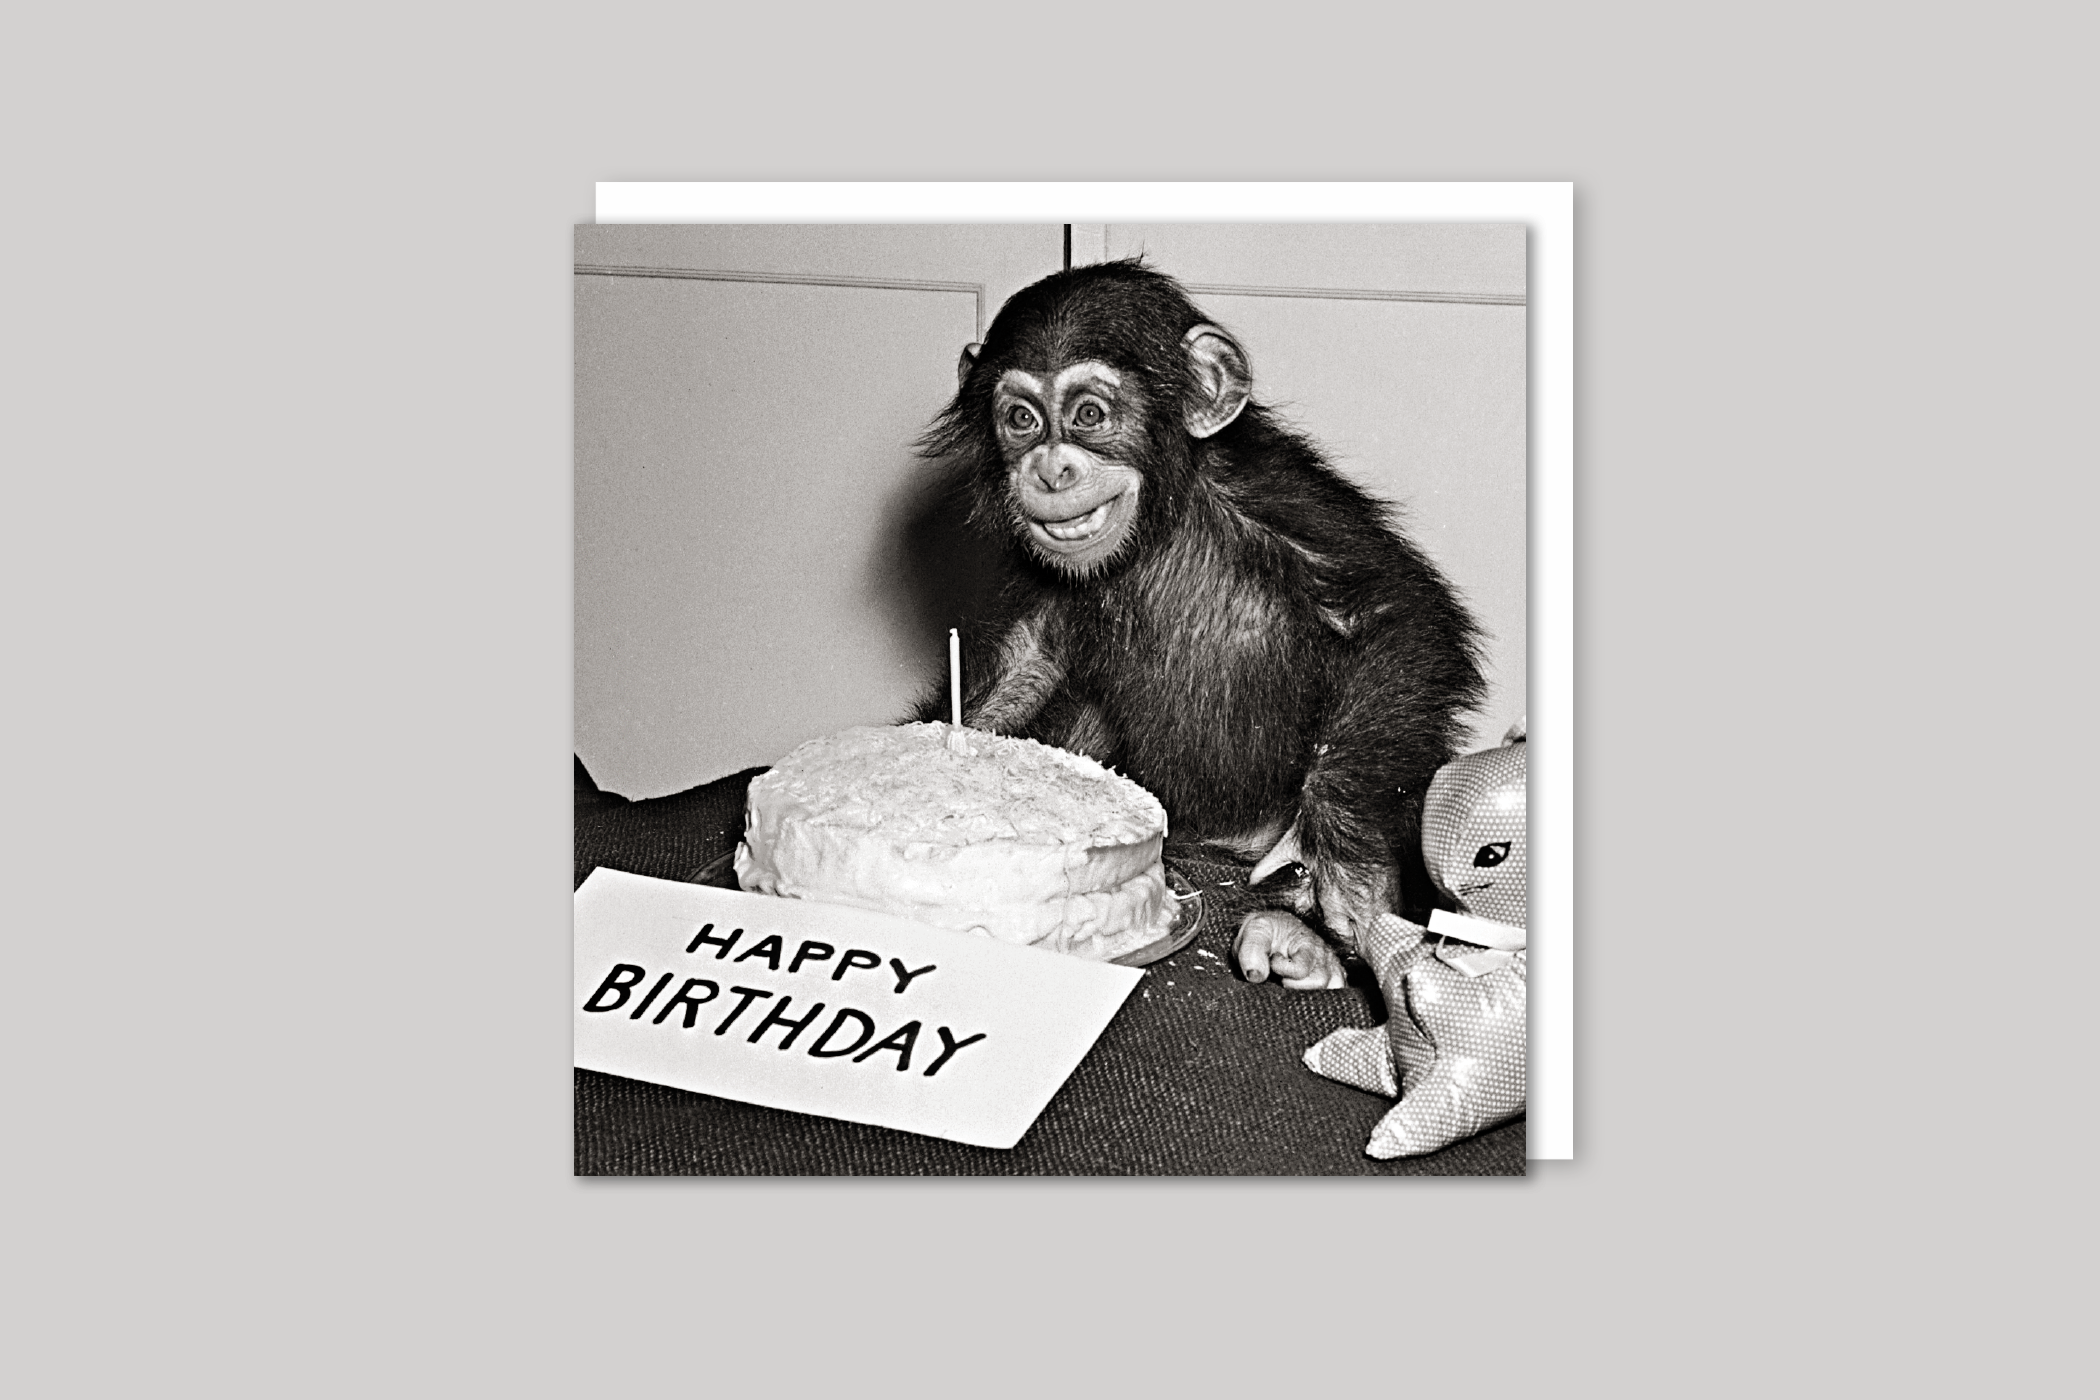 Happy Birthday Chimp retro photograph from Exposure range of photographic cards by Icon, back page.